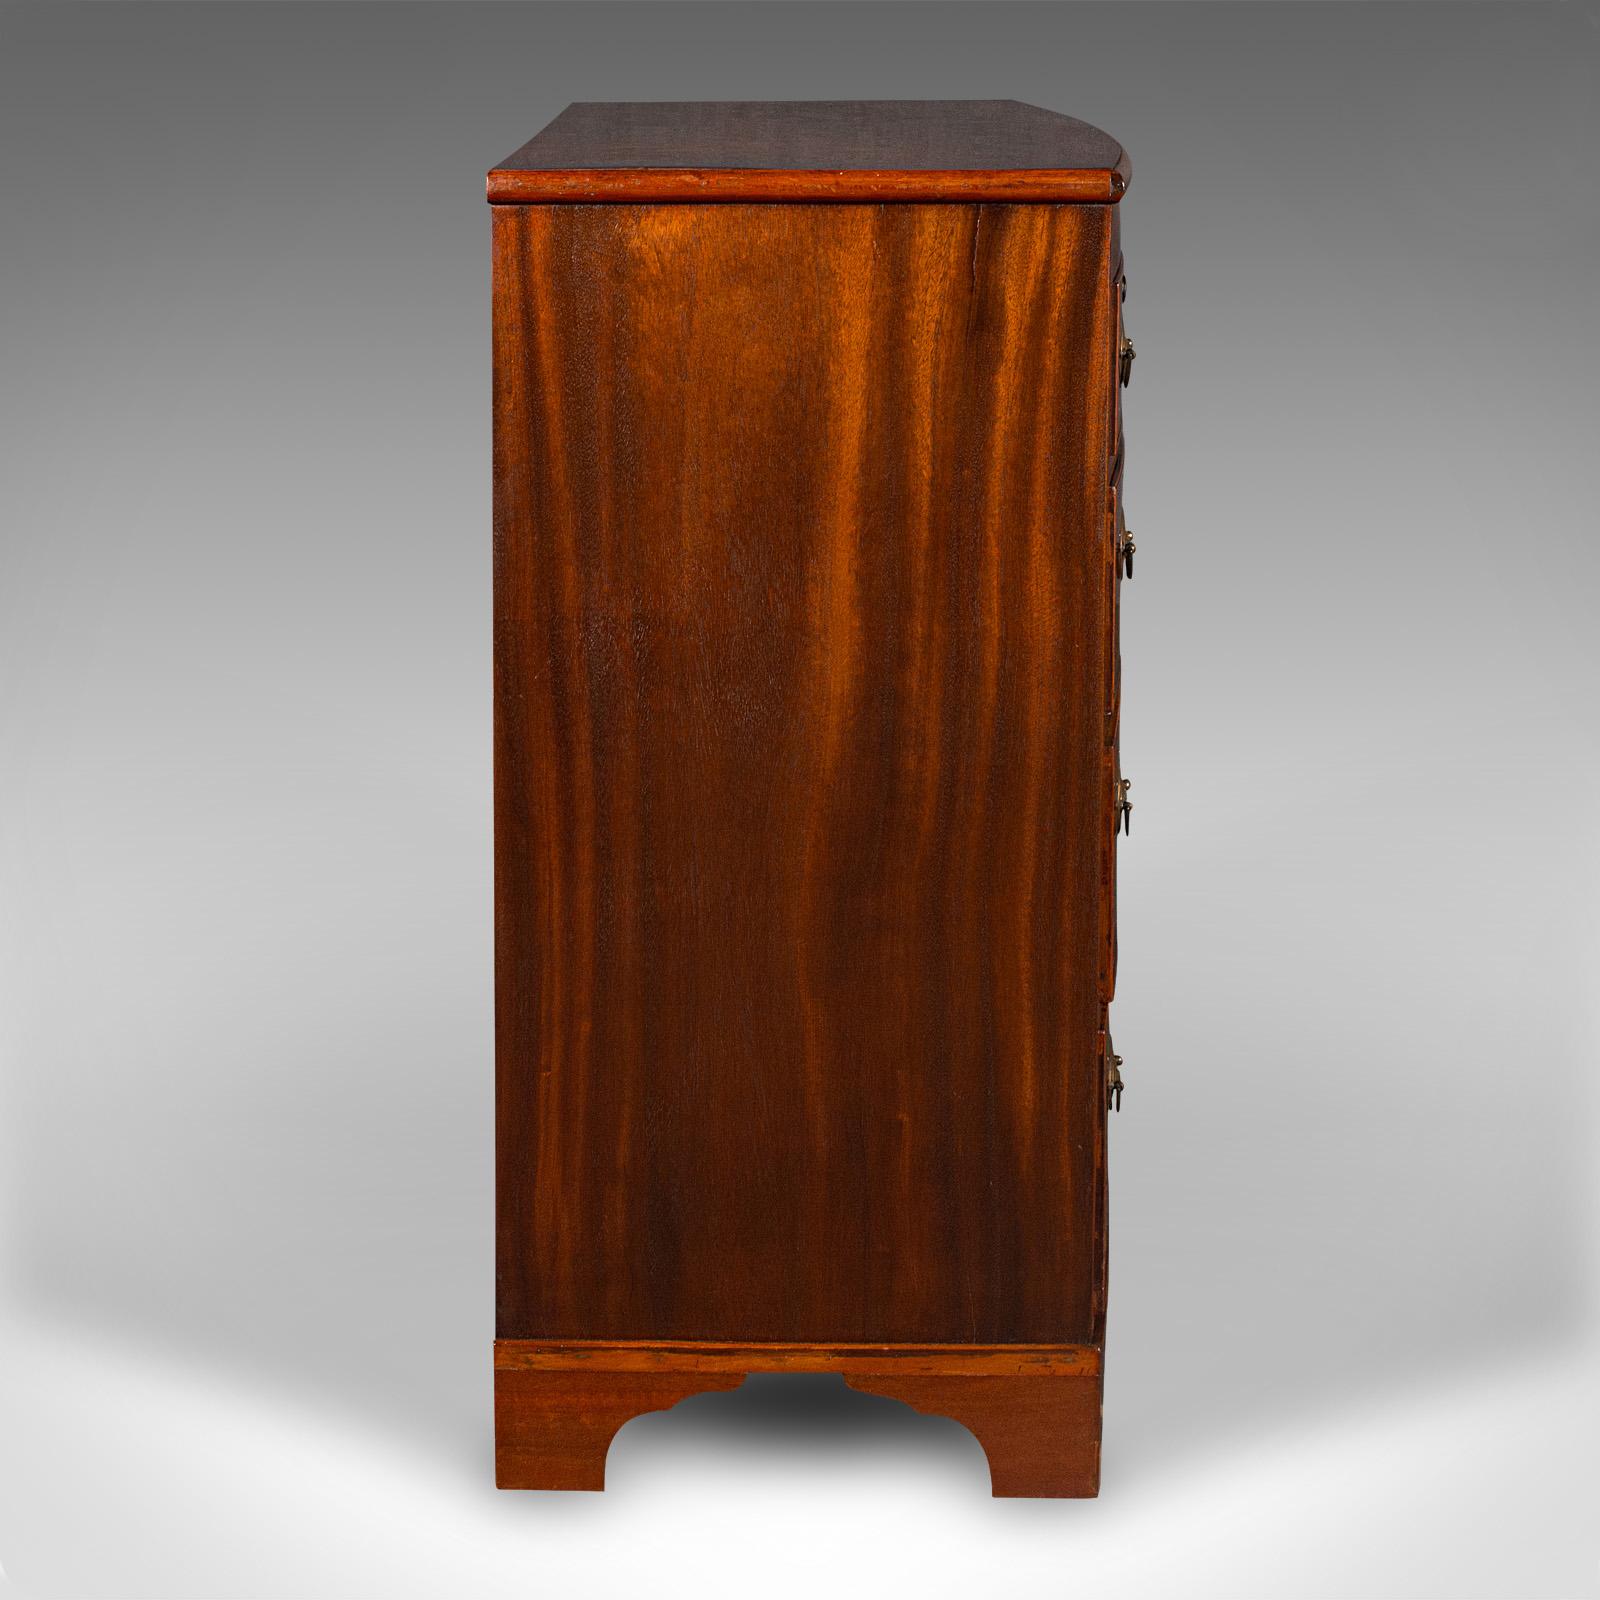 British Antique Bow Front Chest Of Drawers, English, Tallboy, Bedroom, Georgian, C.1800